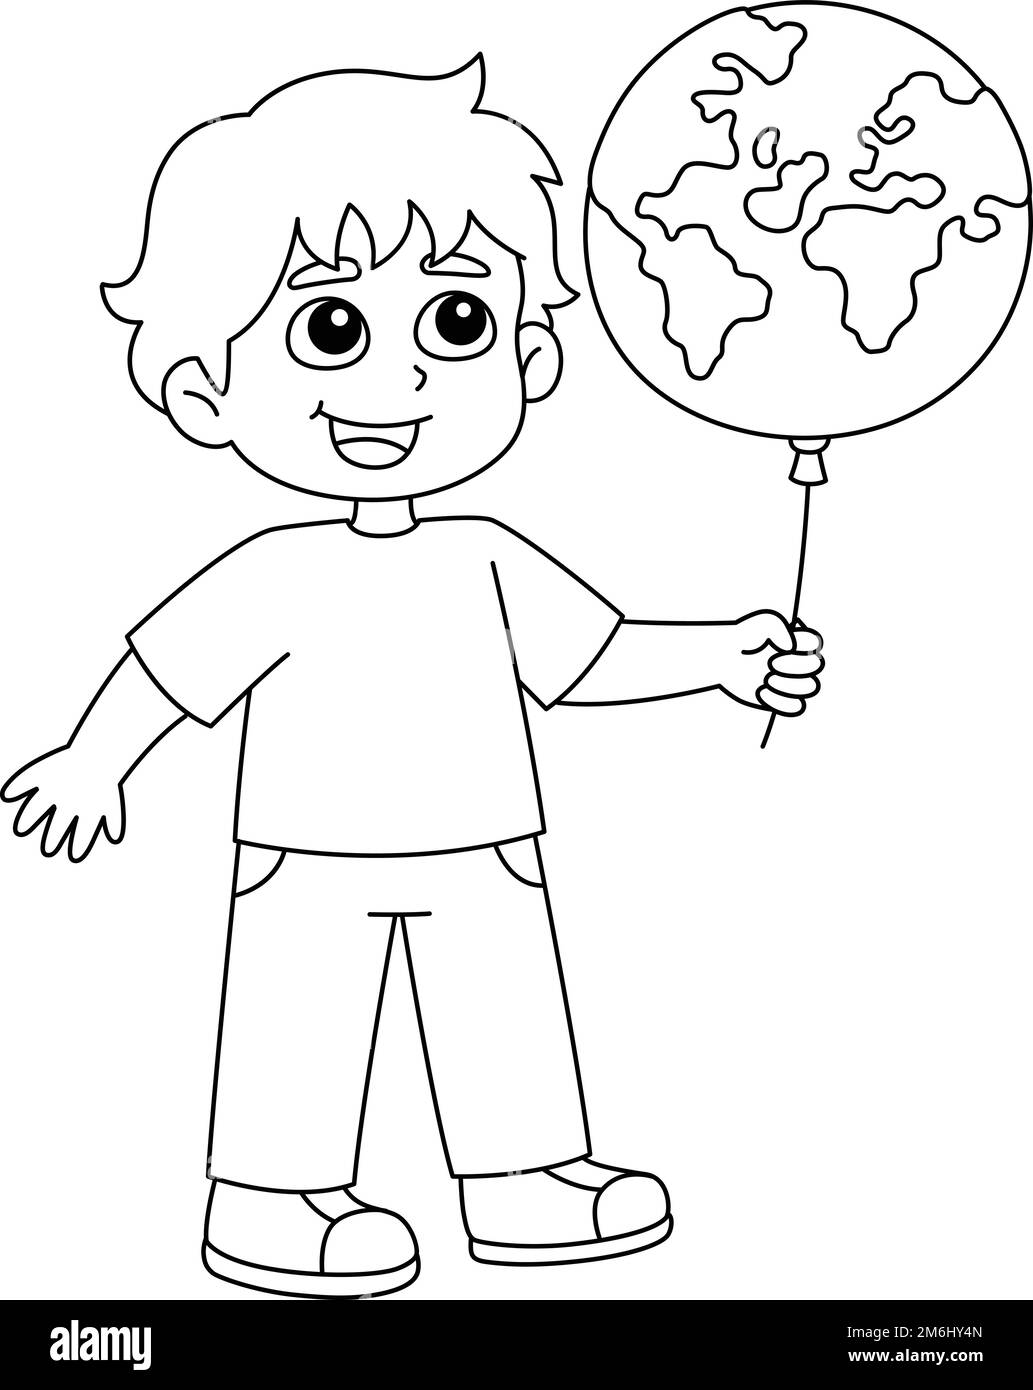 https://c8.alamy.com/comp/2M6HY4N/boy-holding-an-earth-balloon-isolated-coloring-2M6HY4N.jpg